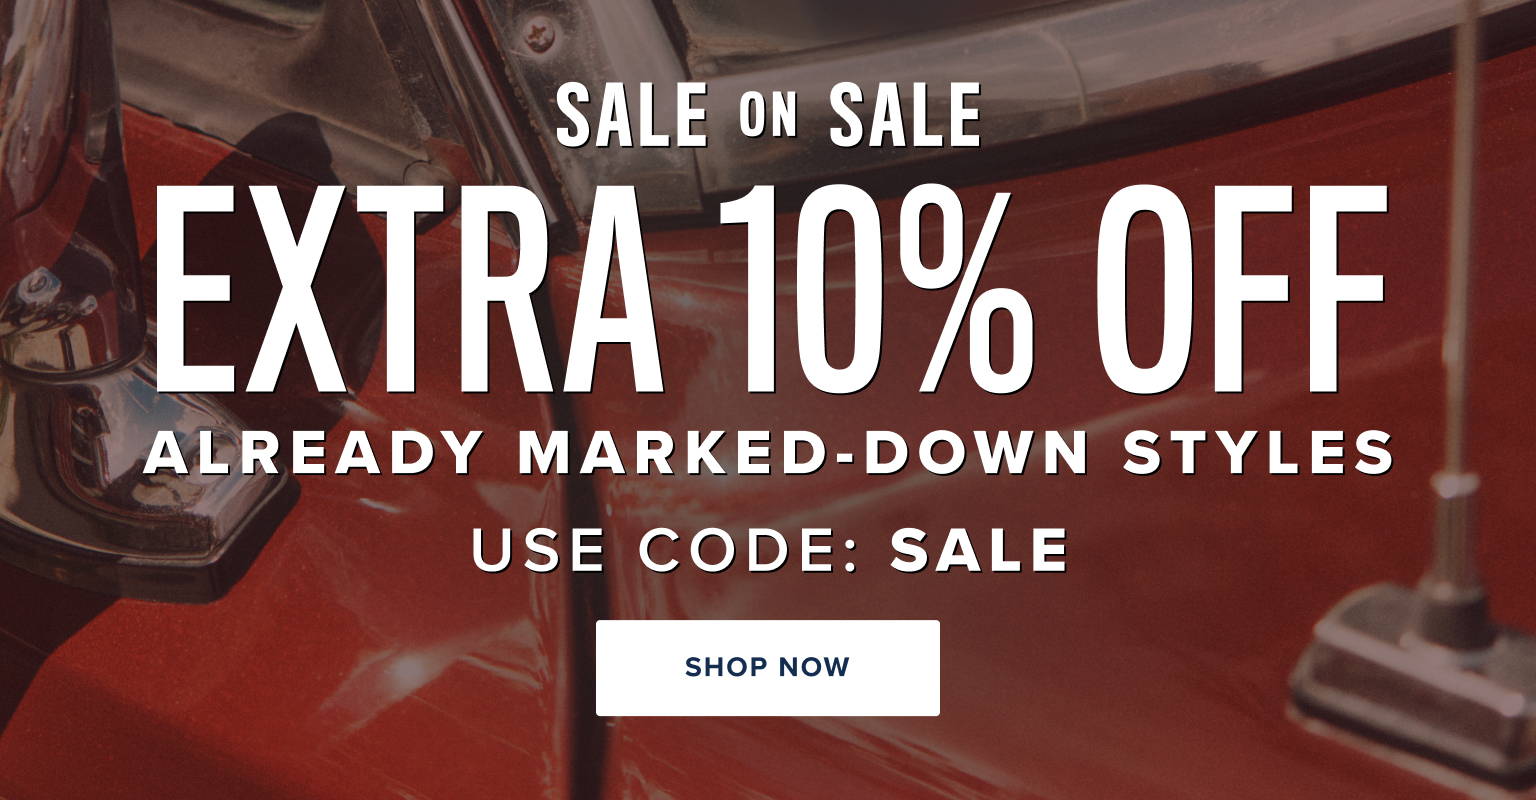 Sale on Sale. Extra 10% off already marked down styles. Use code: SALE 